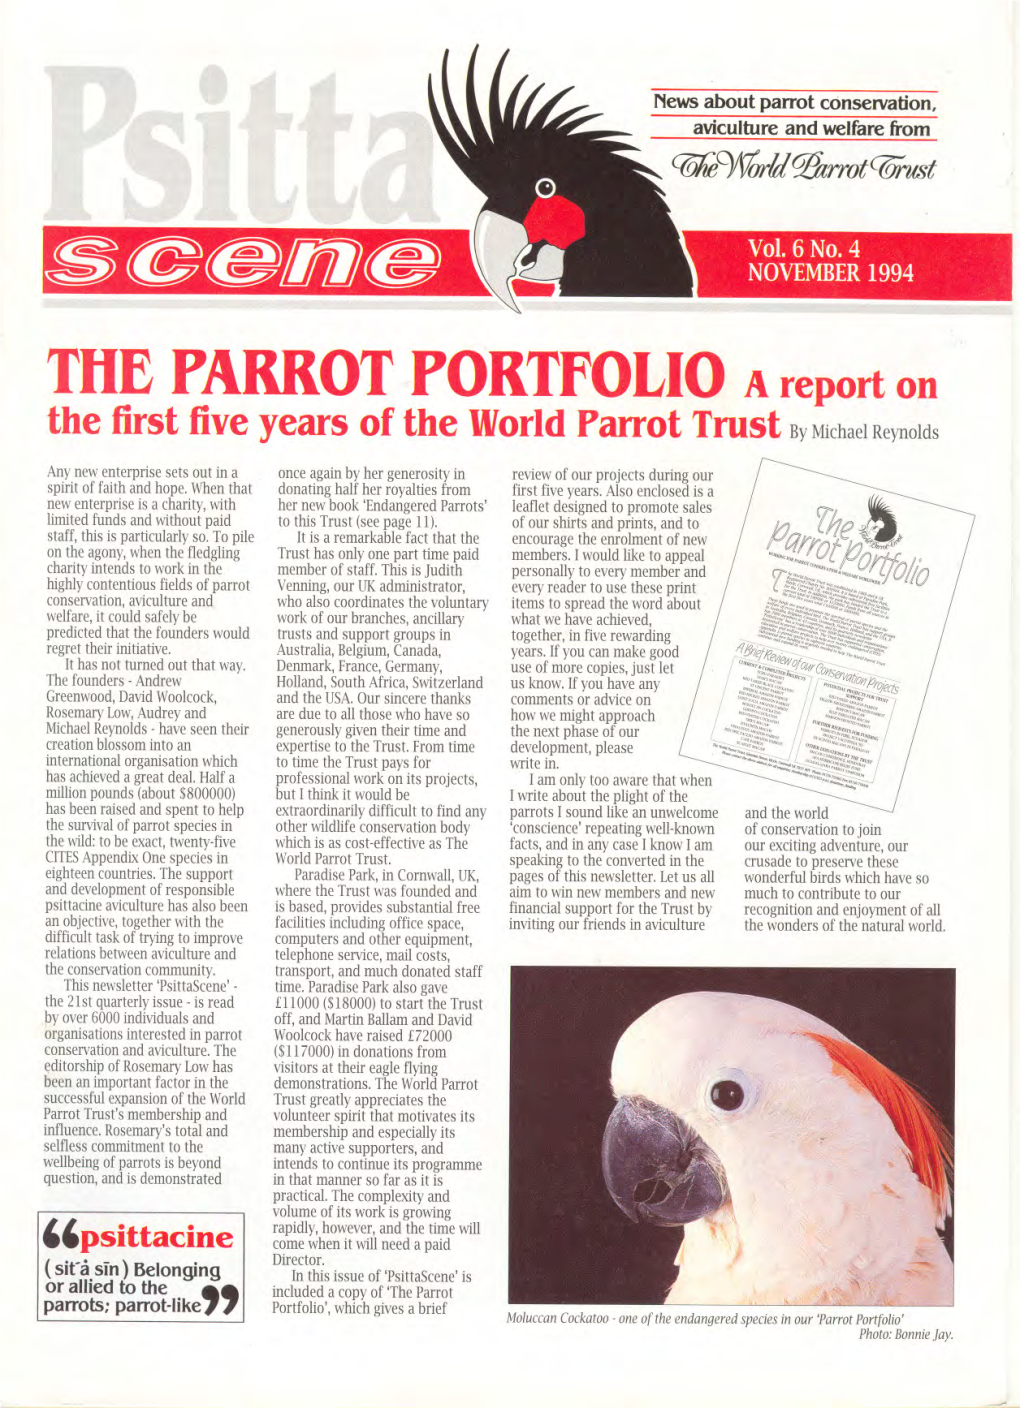 TUBPARROTPORTFOLIOA Report on the First Five Years of the World Parrot Trust by Michael Reynolds